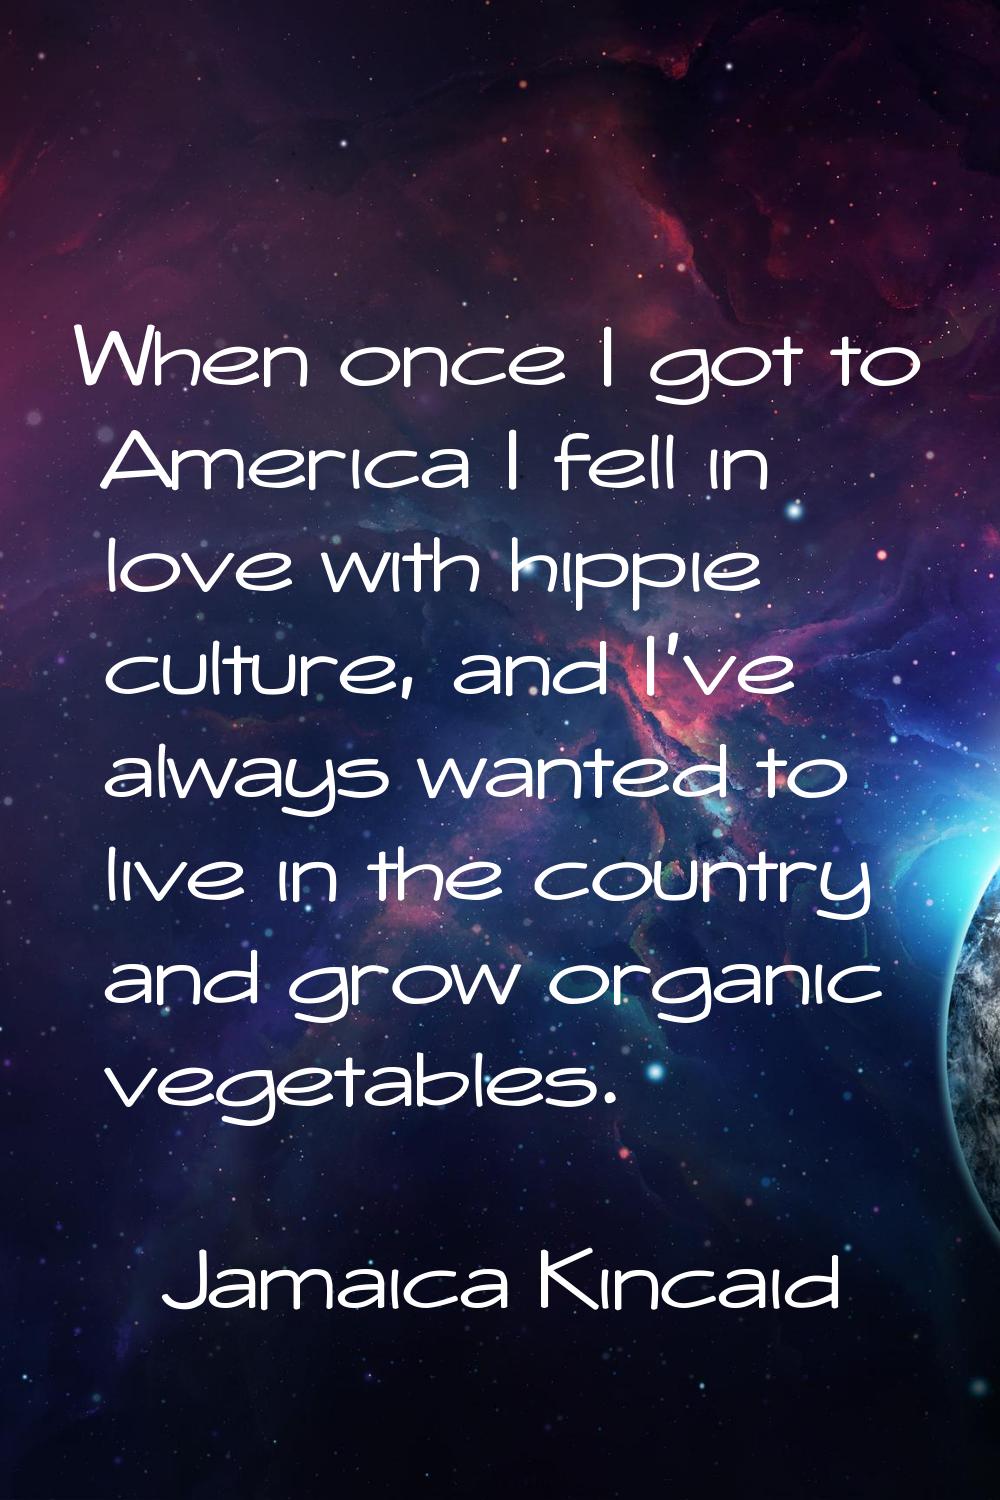 When once I got to America I fell in love with hippie culture, and I've always wanted to live in th